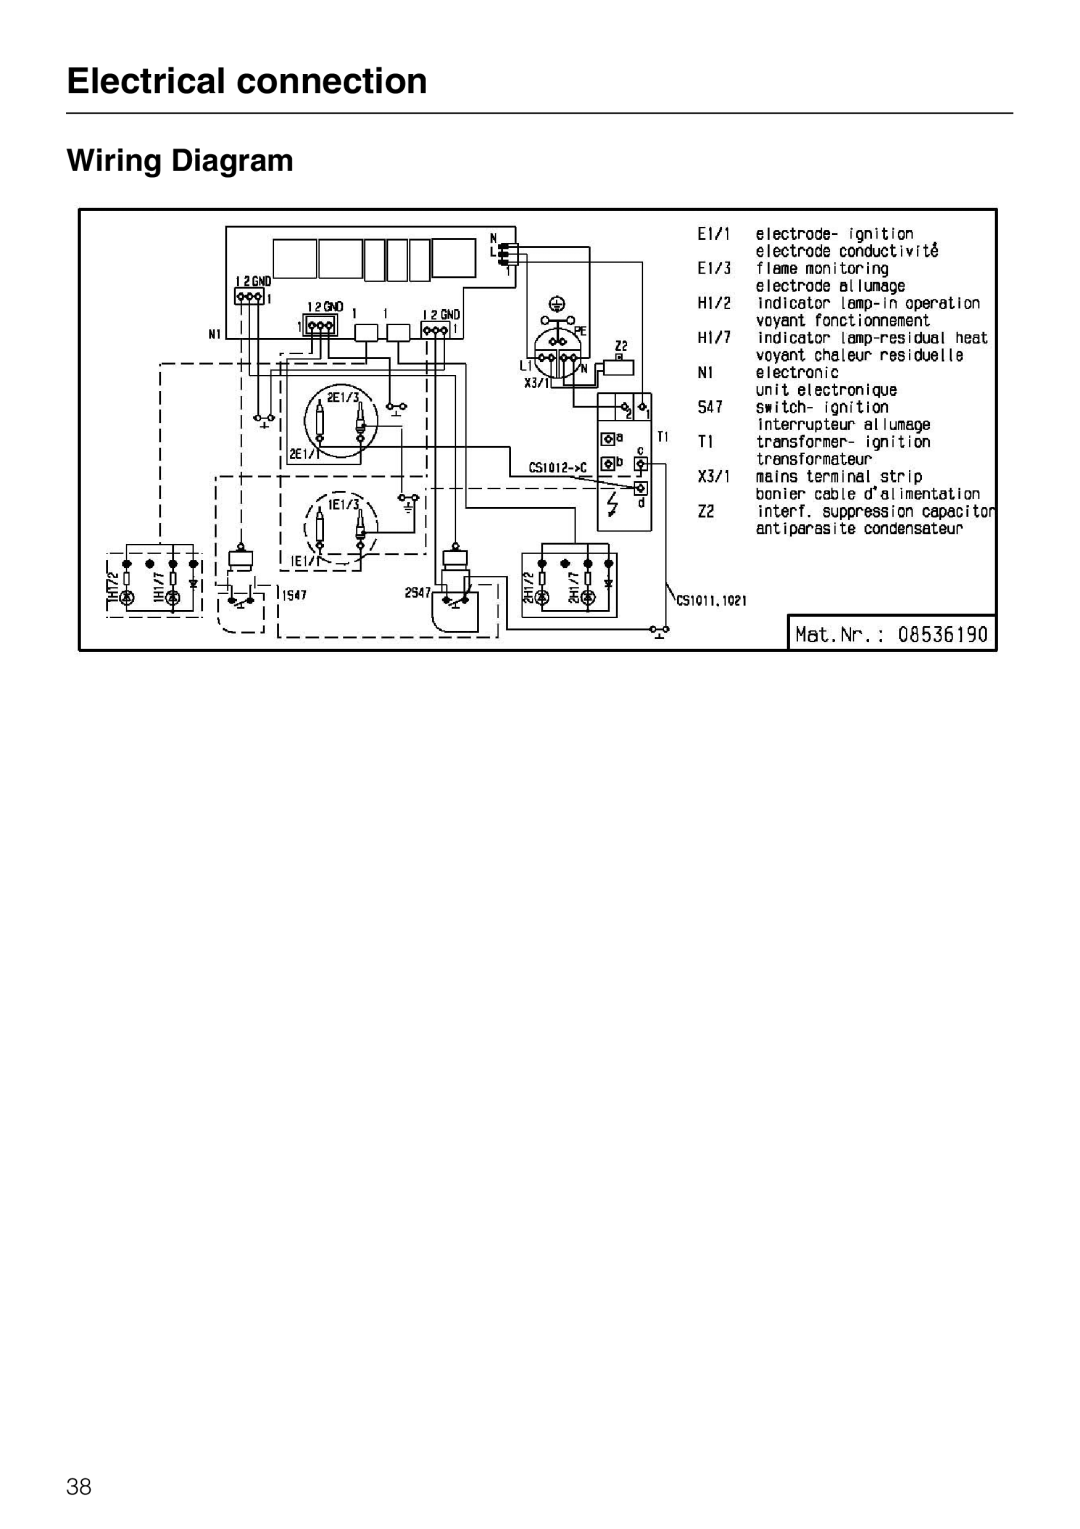 Miele CS 1012 installation instructions Wiring Diagram, Electrical connection 